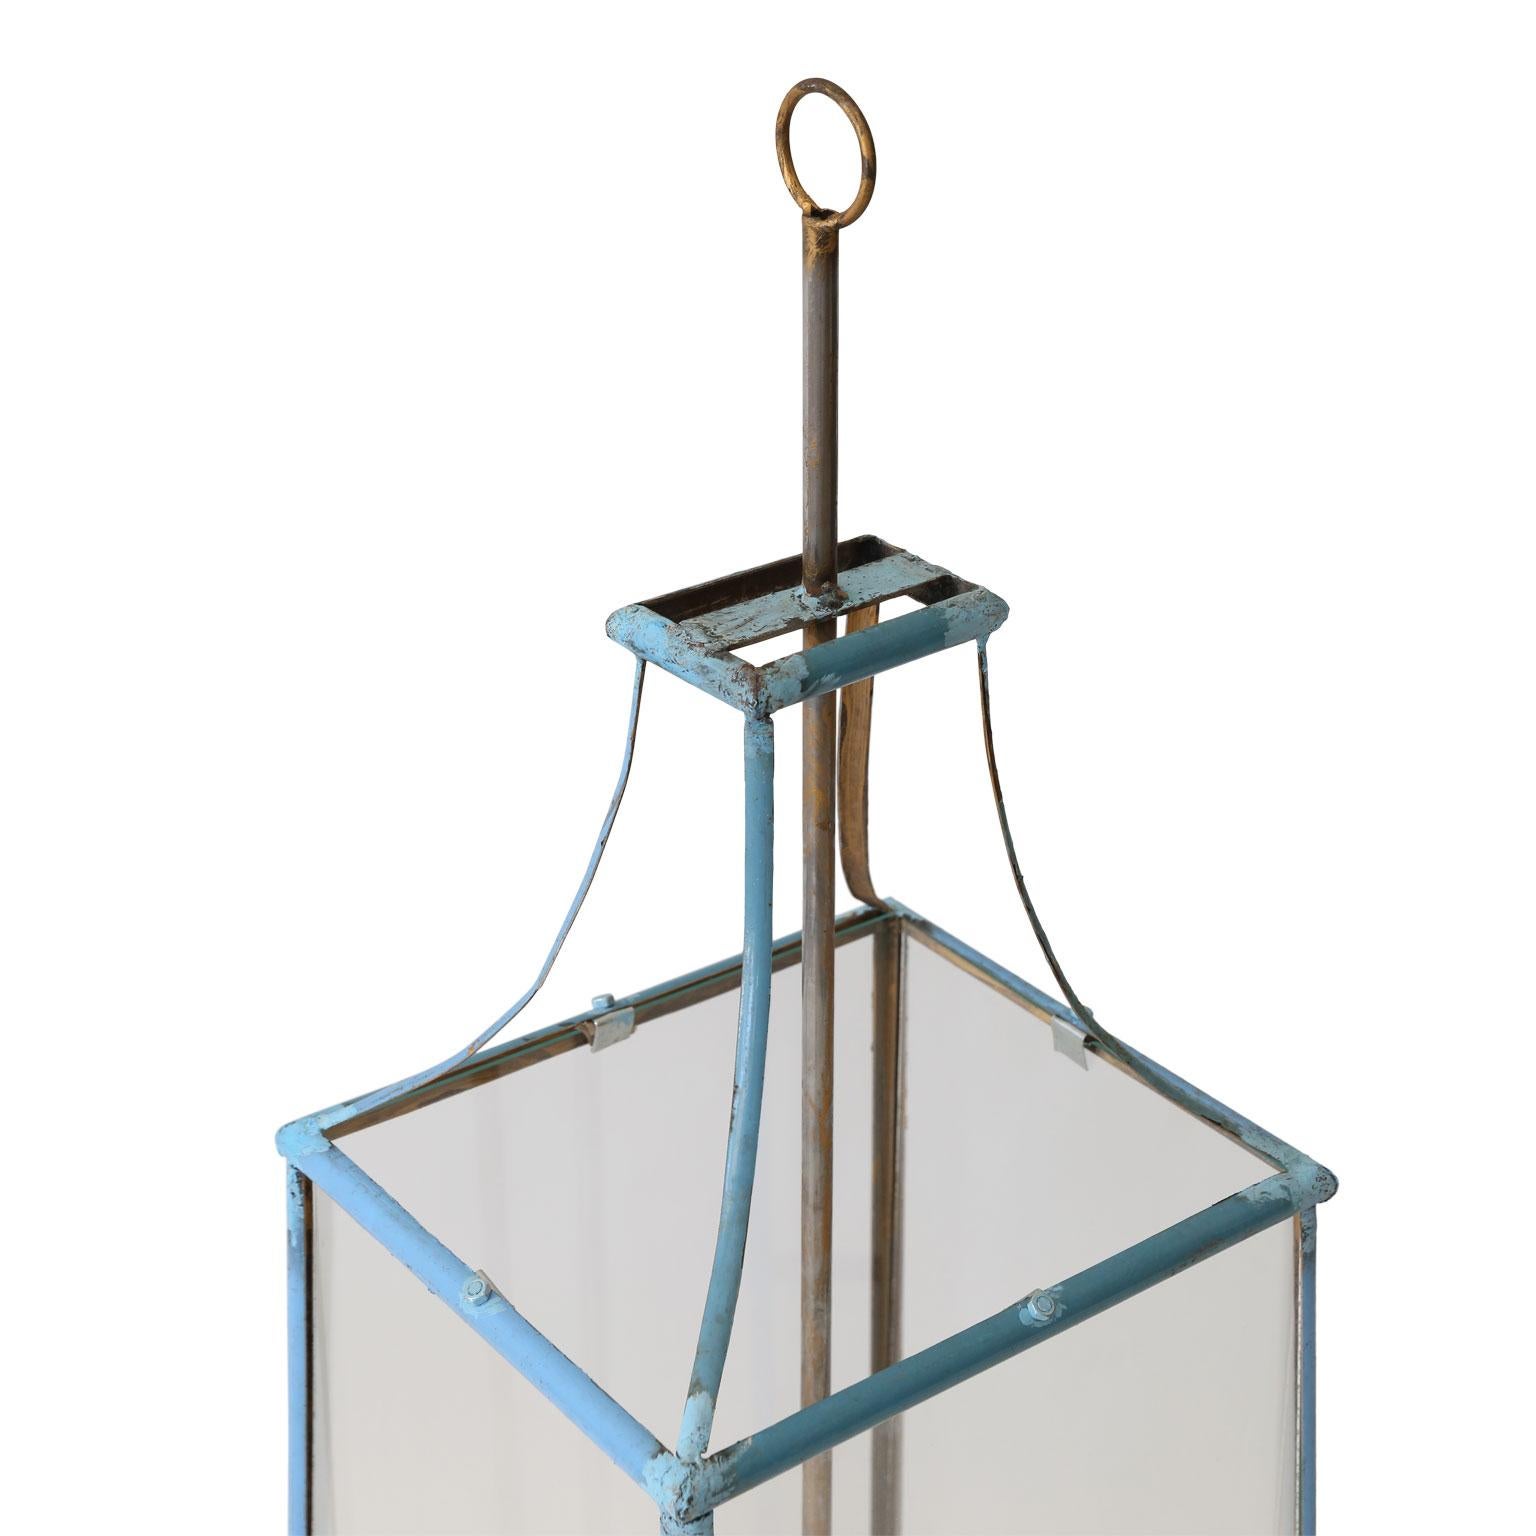 Large rectangular tole lantern, simple, elegant tole and wrought iron lantern. Painted in light blue accented by a gilded chrome central rod.